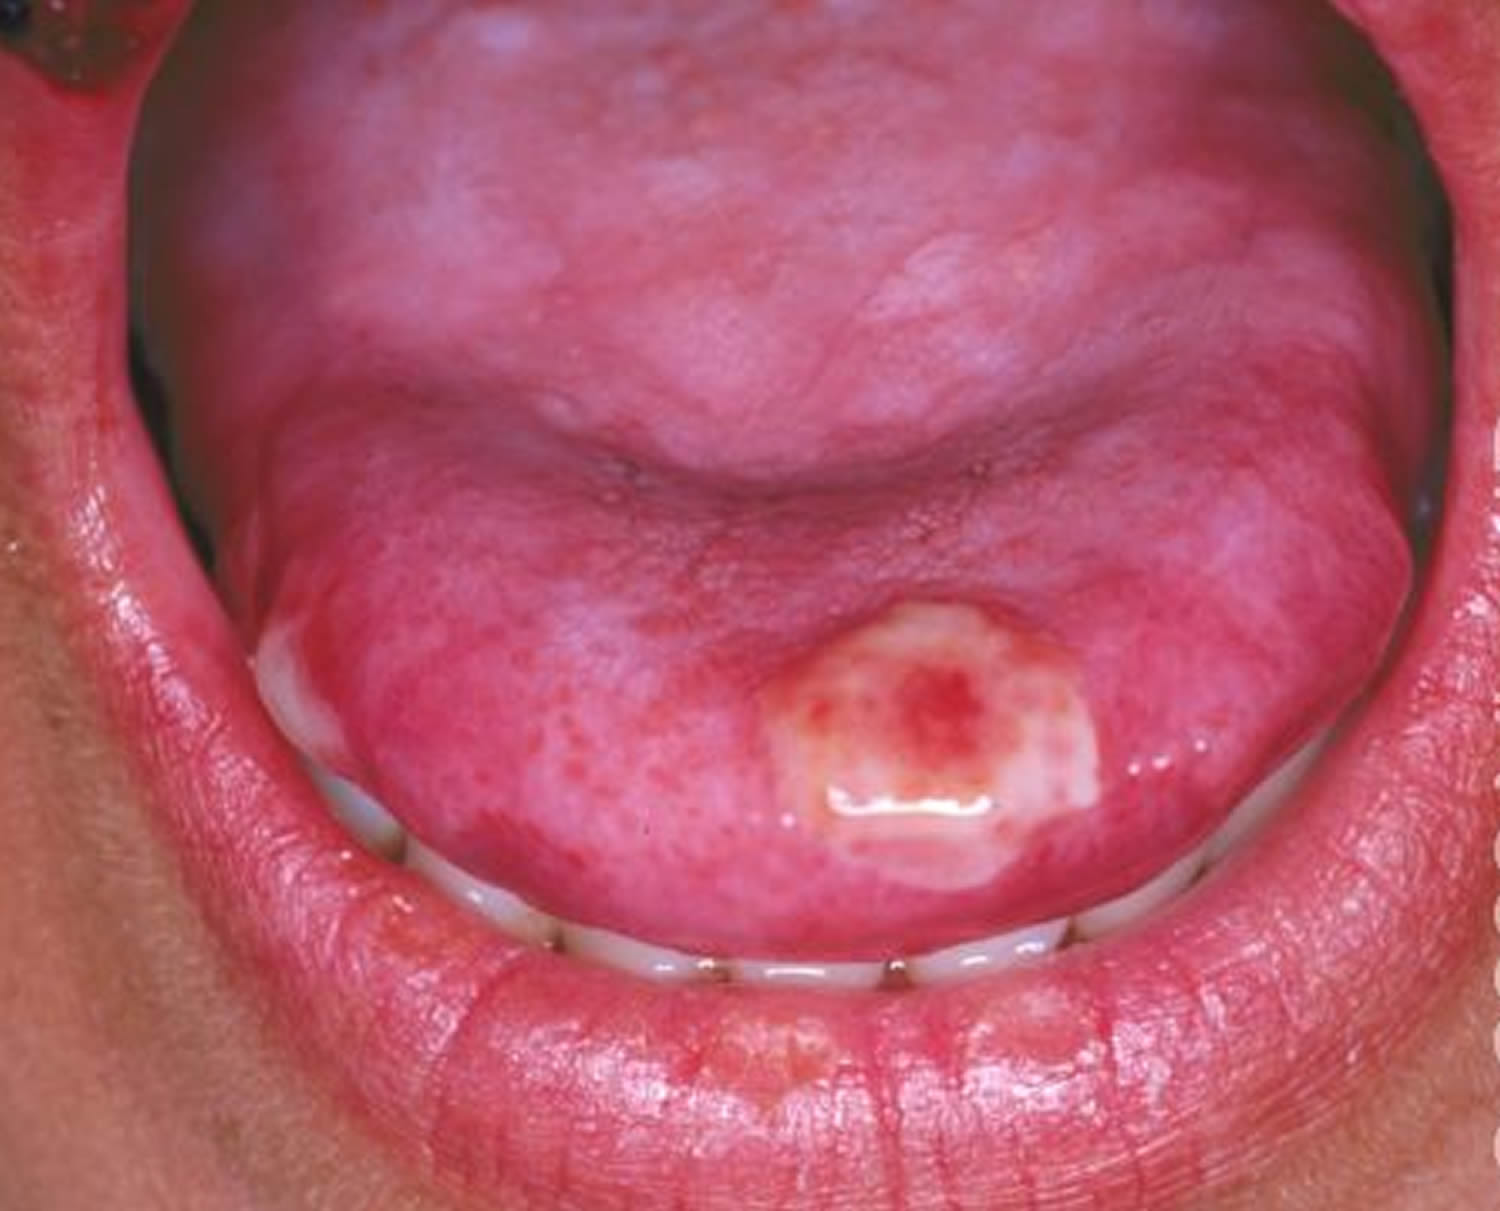 blisters on tongue